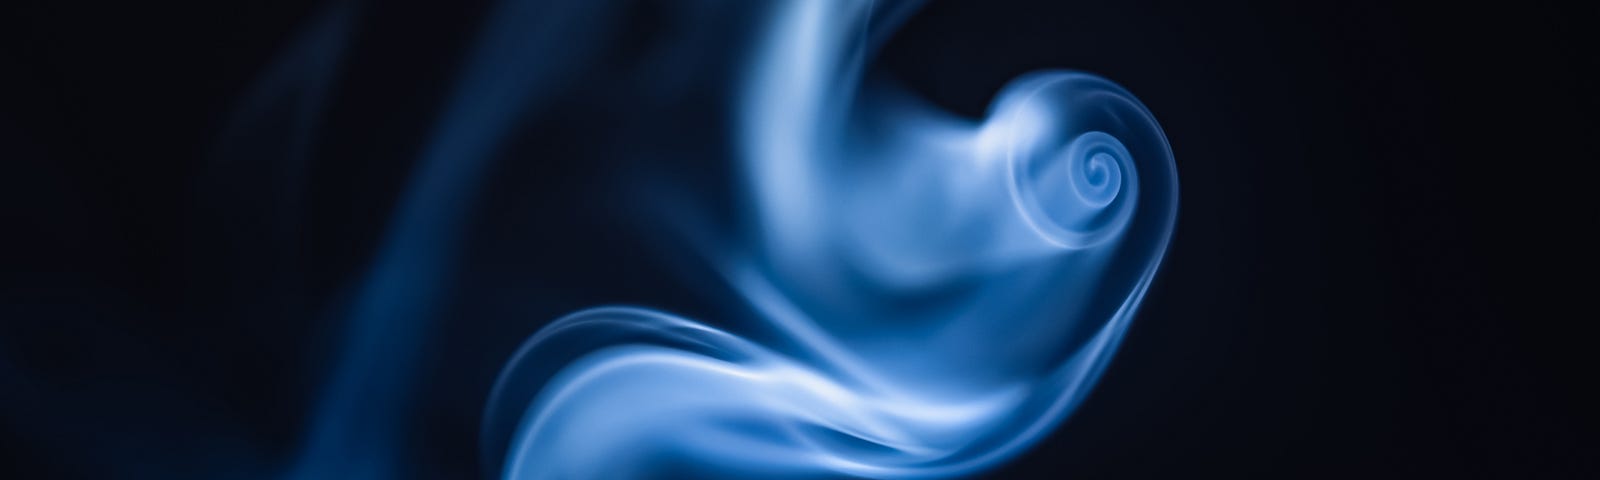 This is a photo of a swirling object that is blue on a black background